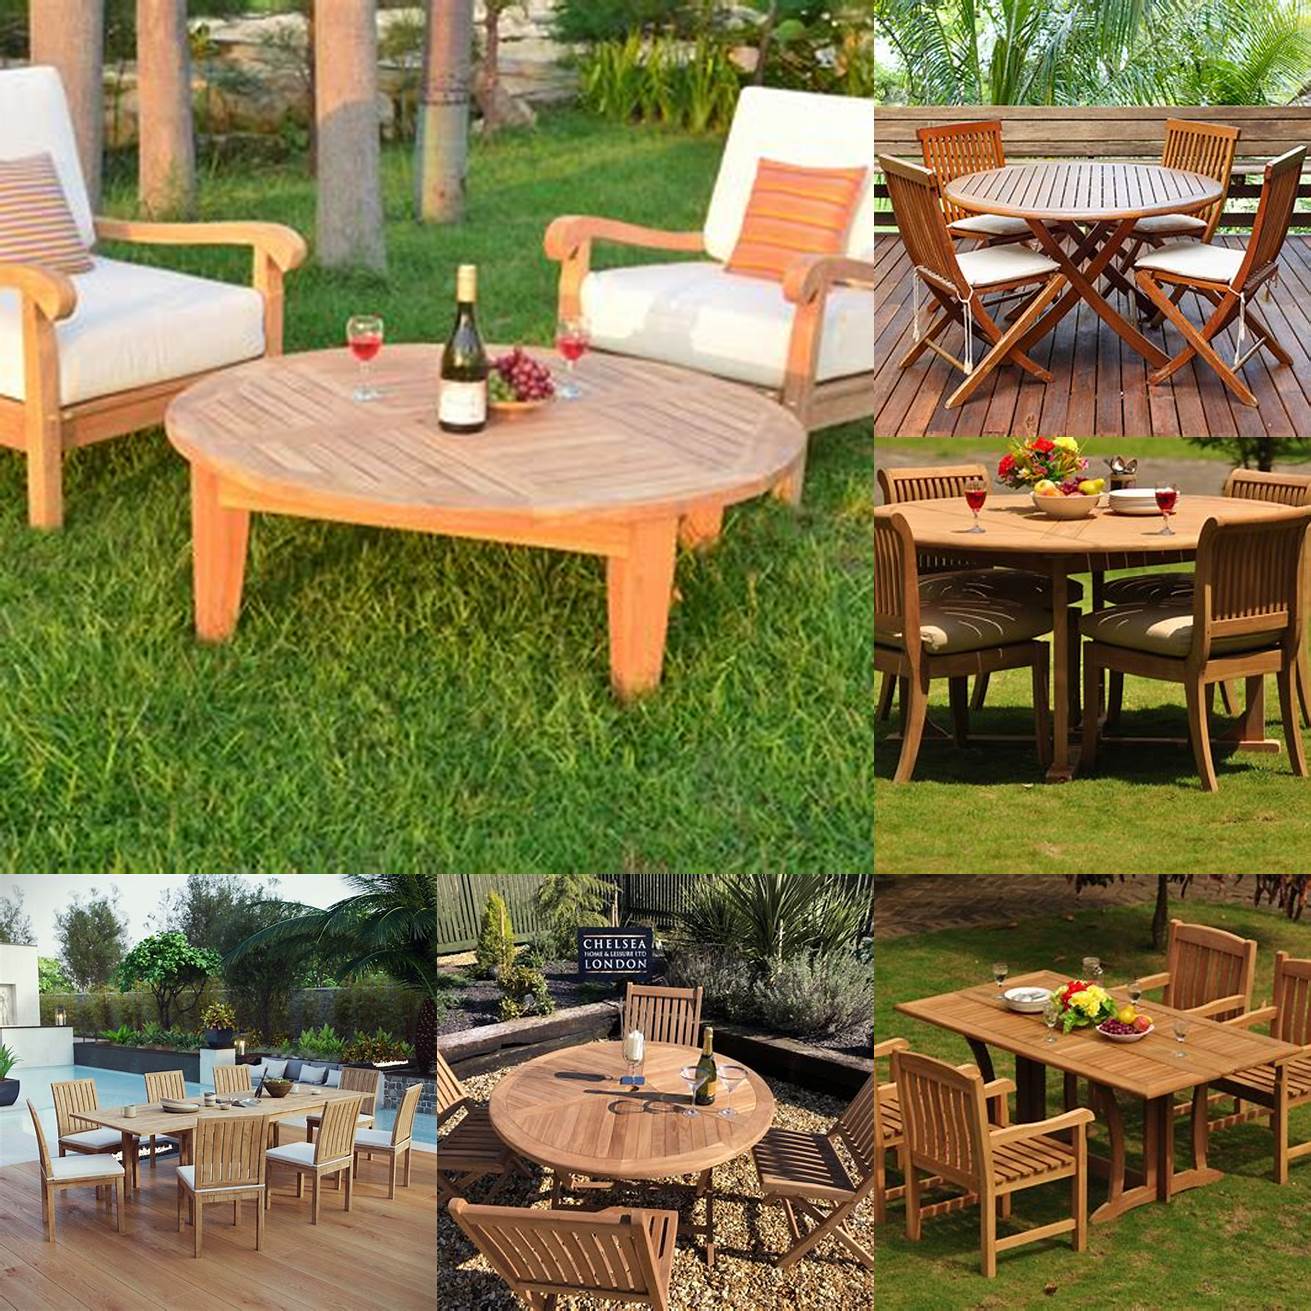 Image of Teak Furniture in Different Spaces